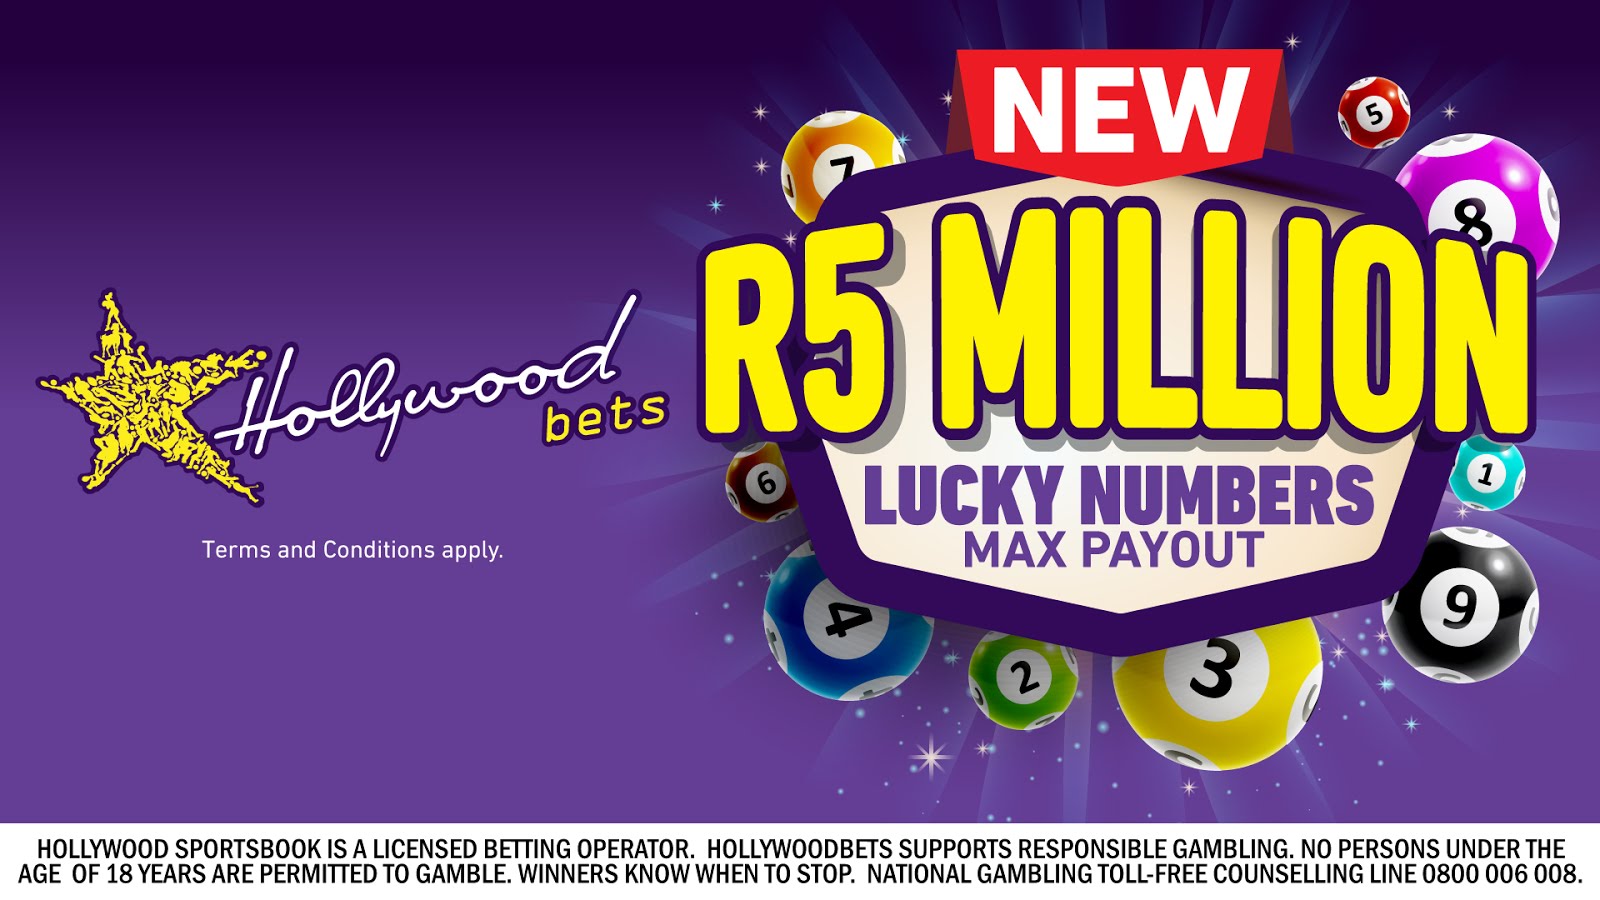 Lucky Numbers Max Payout now R5 Million at Hollywoodbets! Terms and Conditions Apply